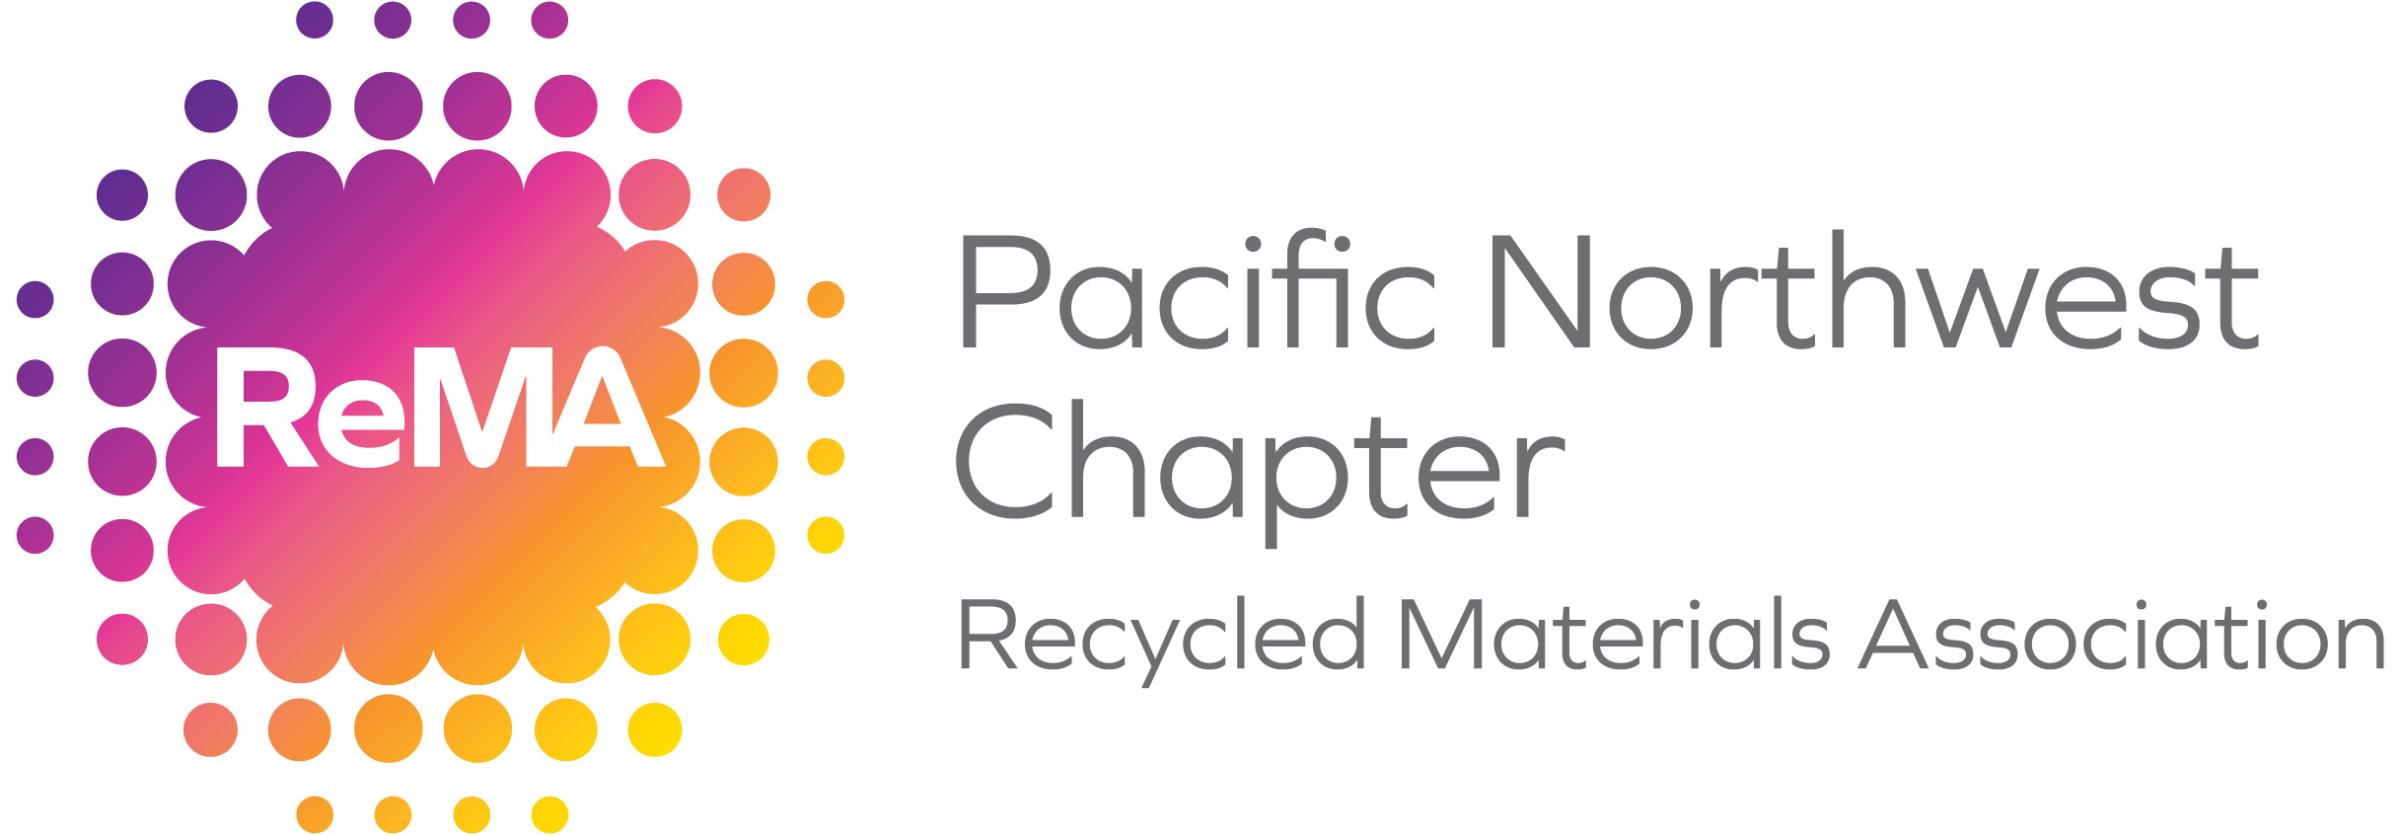 ReMA Pacific Northwest Chapter